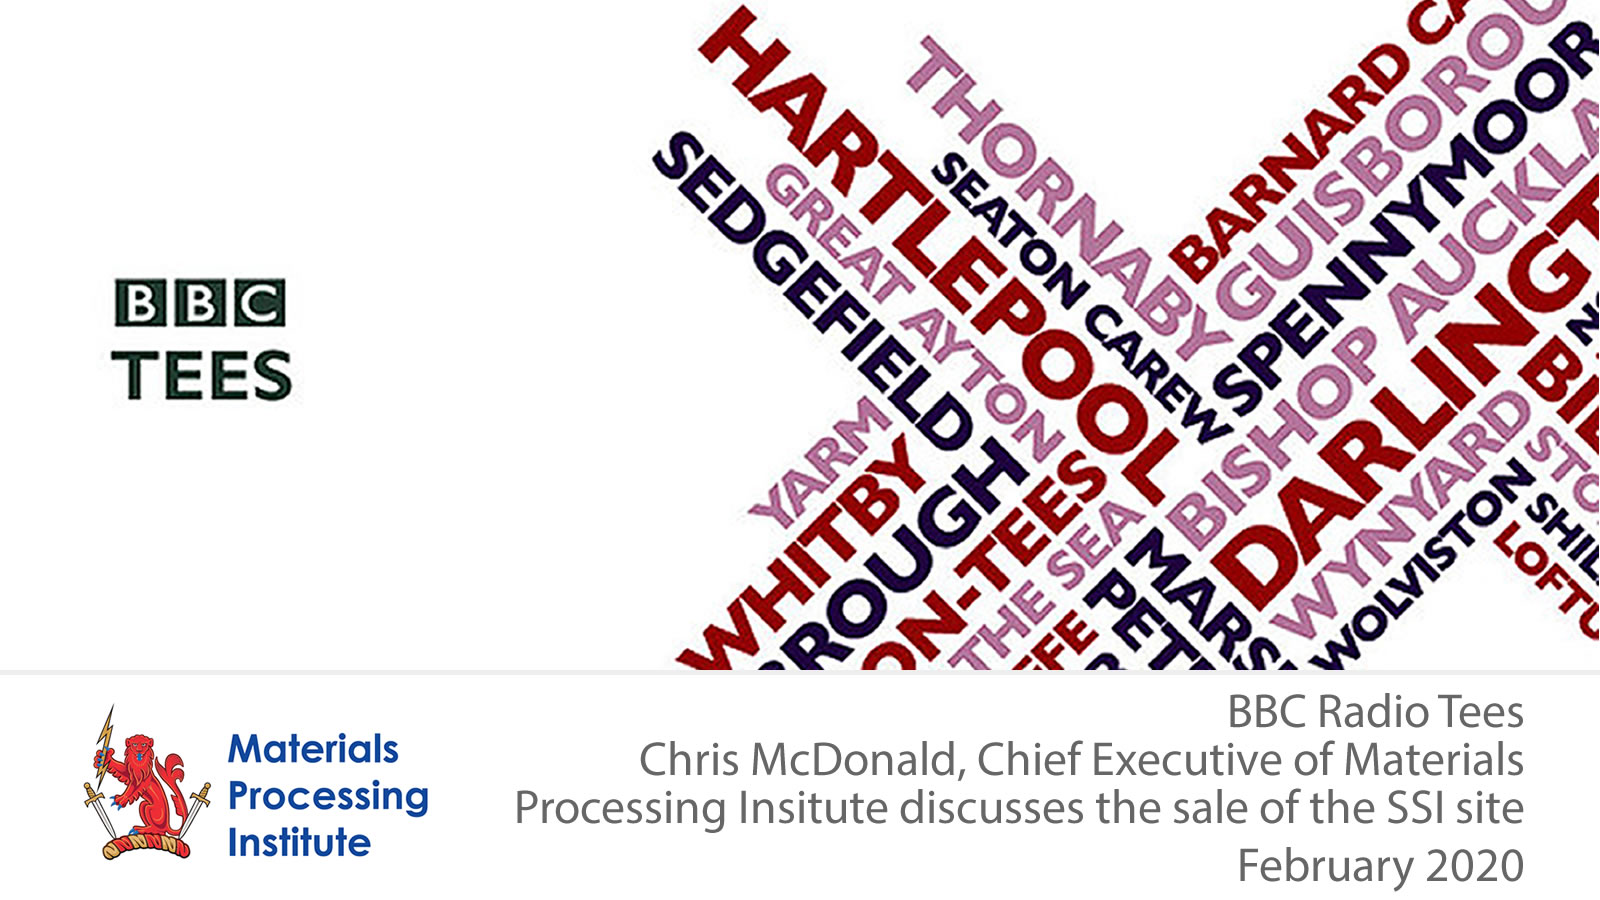 Chris McDonald, Chief Executive of Materials Processing Insitute discusses the sale of the SSI site - February 2020